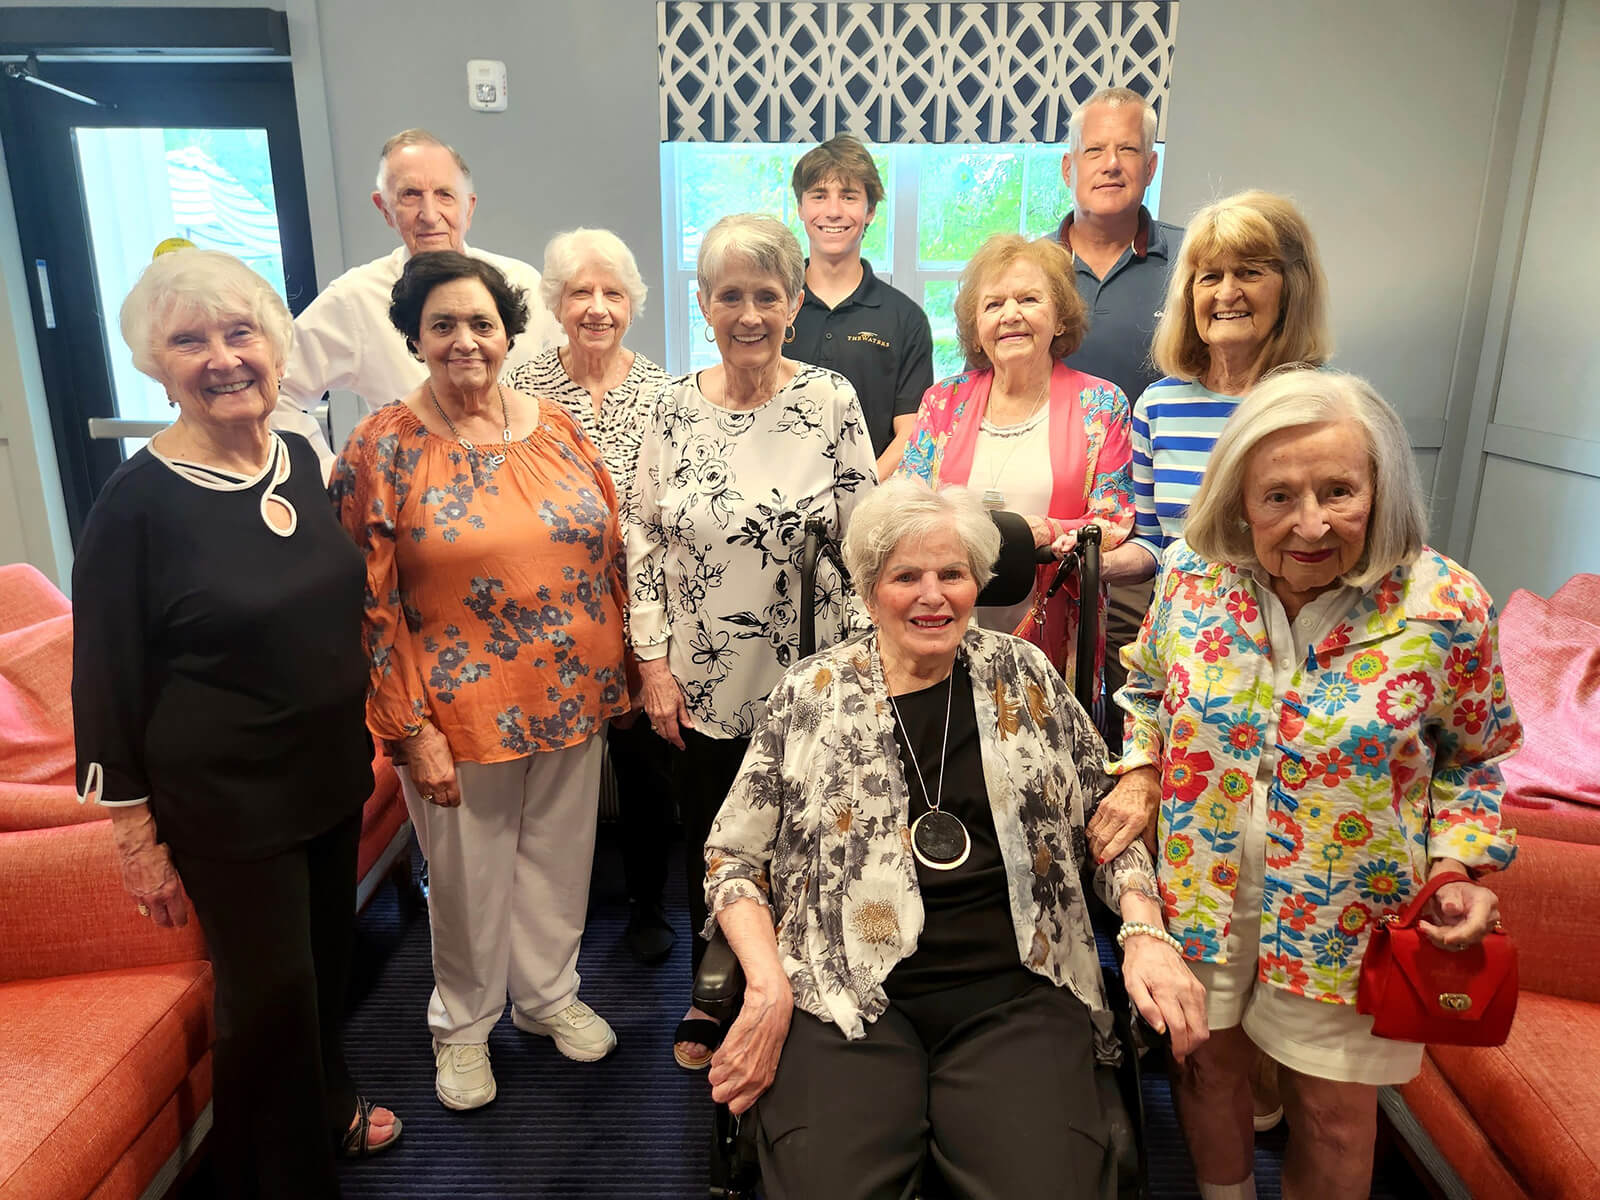 Smiling residents of The Waters of Excelsior posing for a group photo, highlighting the close-knit and friendly community atmosphere.